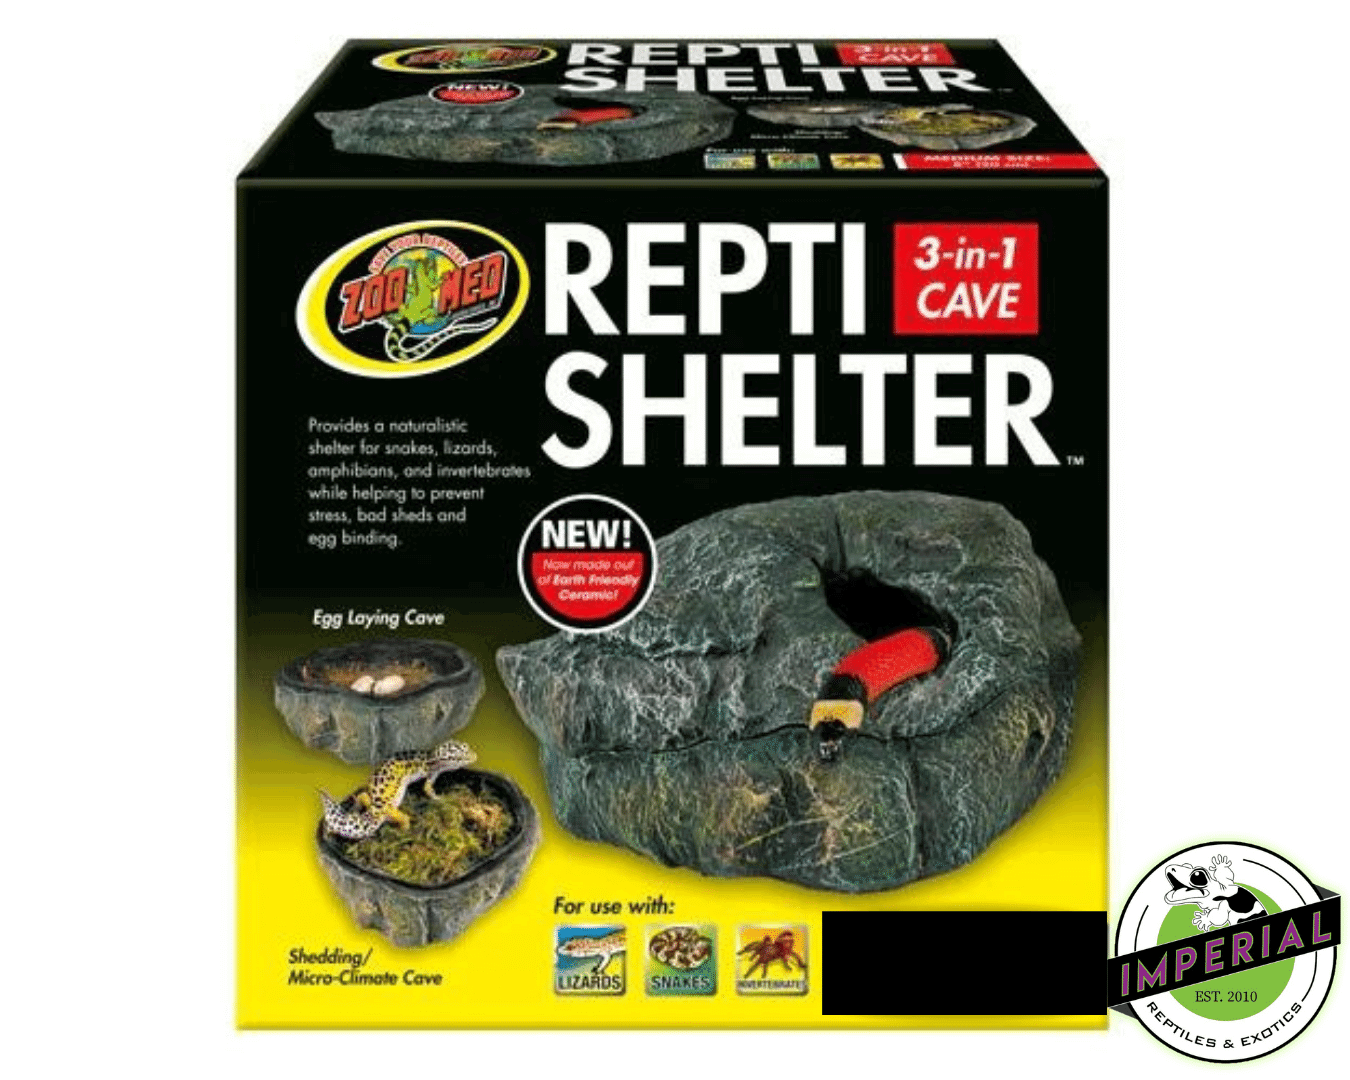 reptile hide for sale online. buy cheap natural looking pet reptile hide decorations and accessories for reptile tanks.